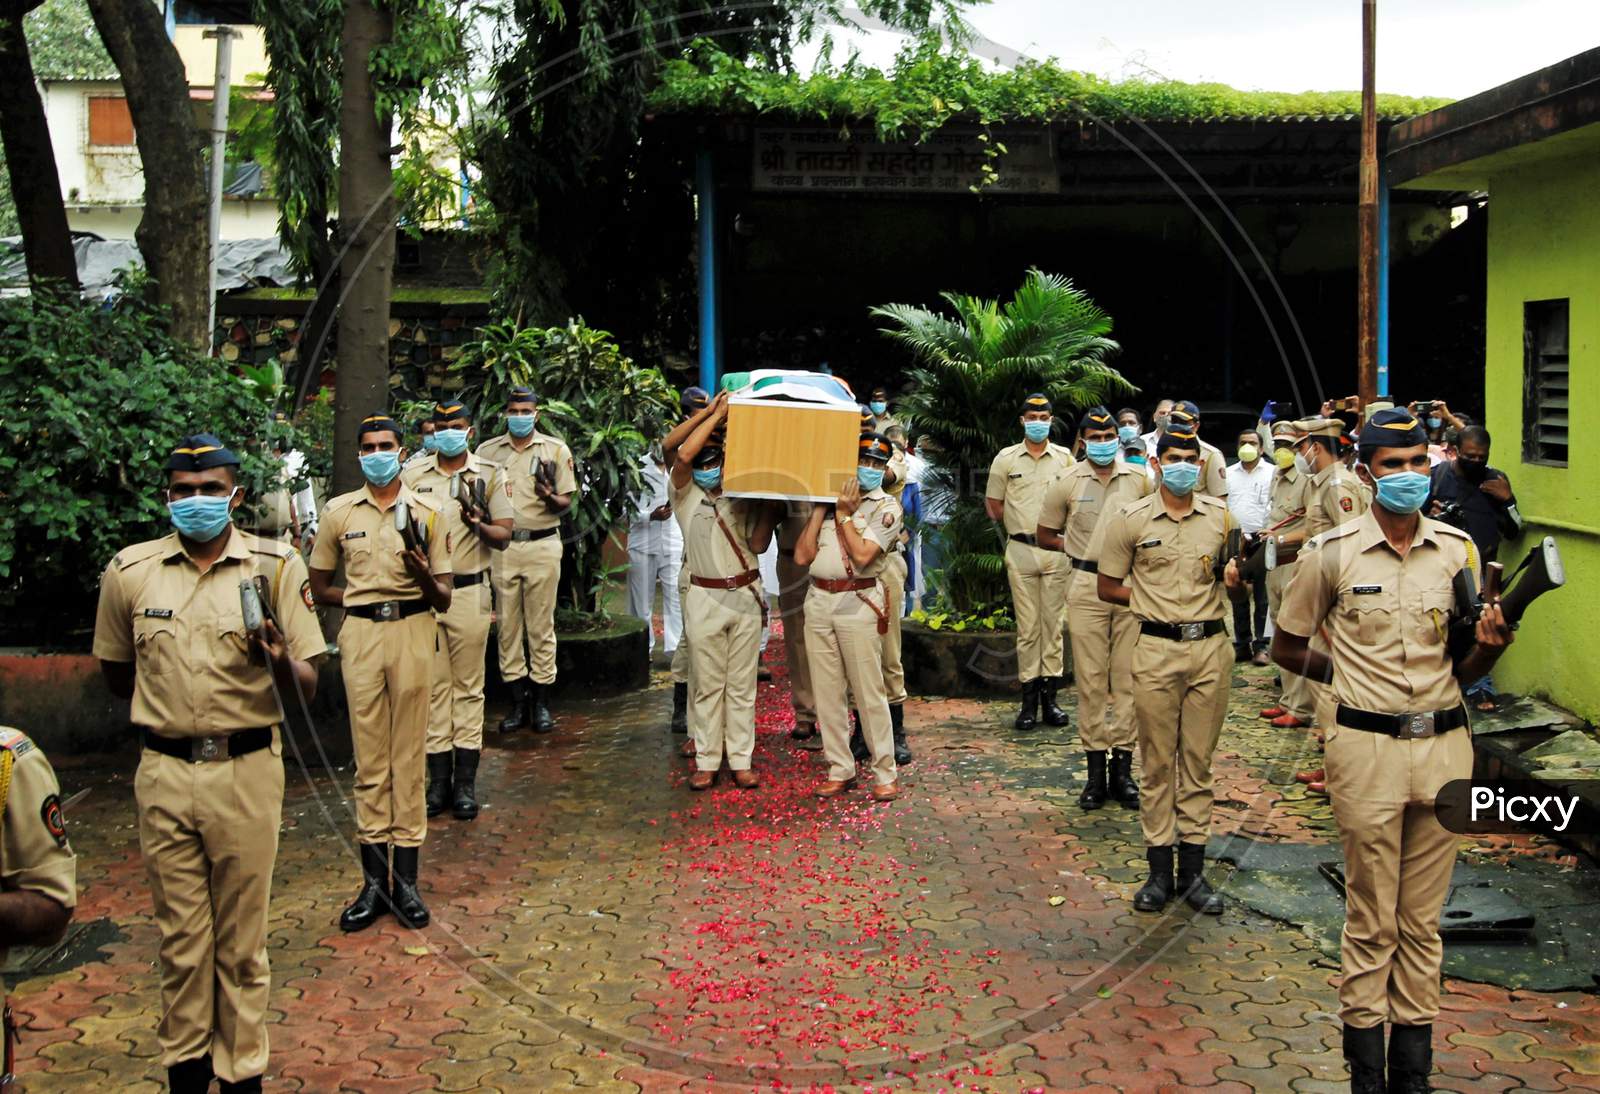 Police personnel carry the coffin of deceased Air India pilot Deepak Sathe, during his funeral in Mumbai, India on August 11, 2020.